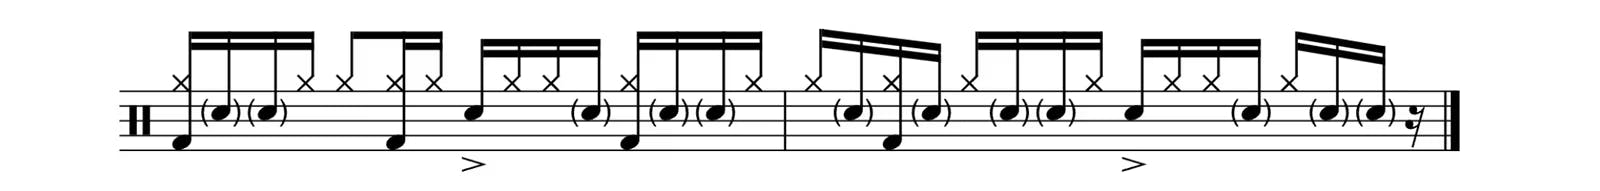 The full notation of the groove for all drums